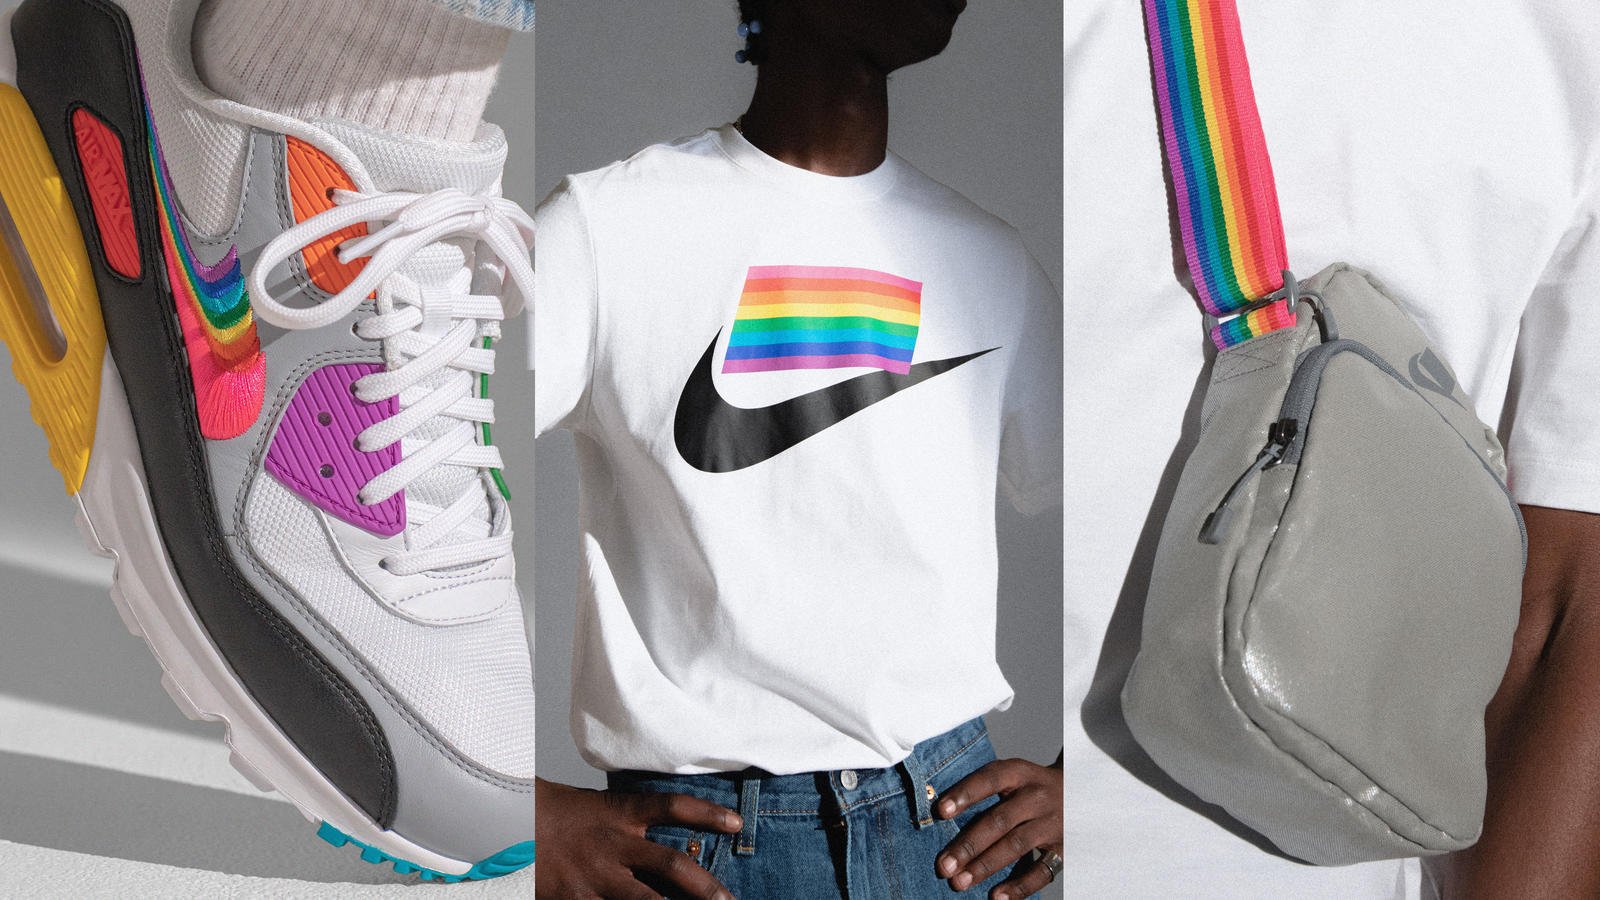 Nike BeTrue 2019 Collection native